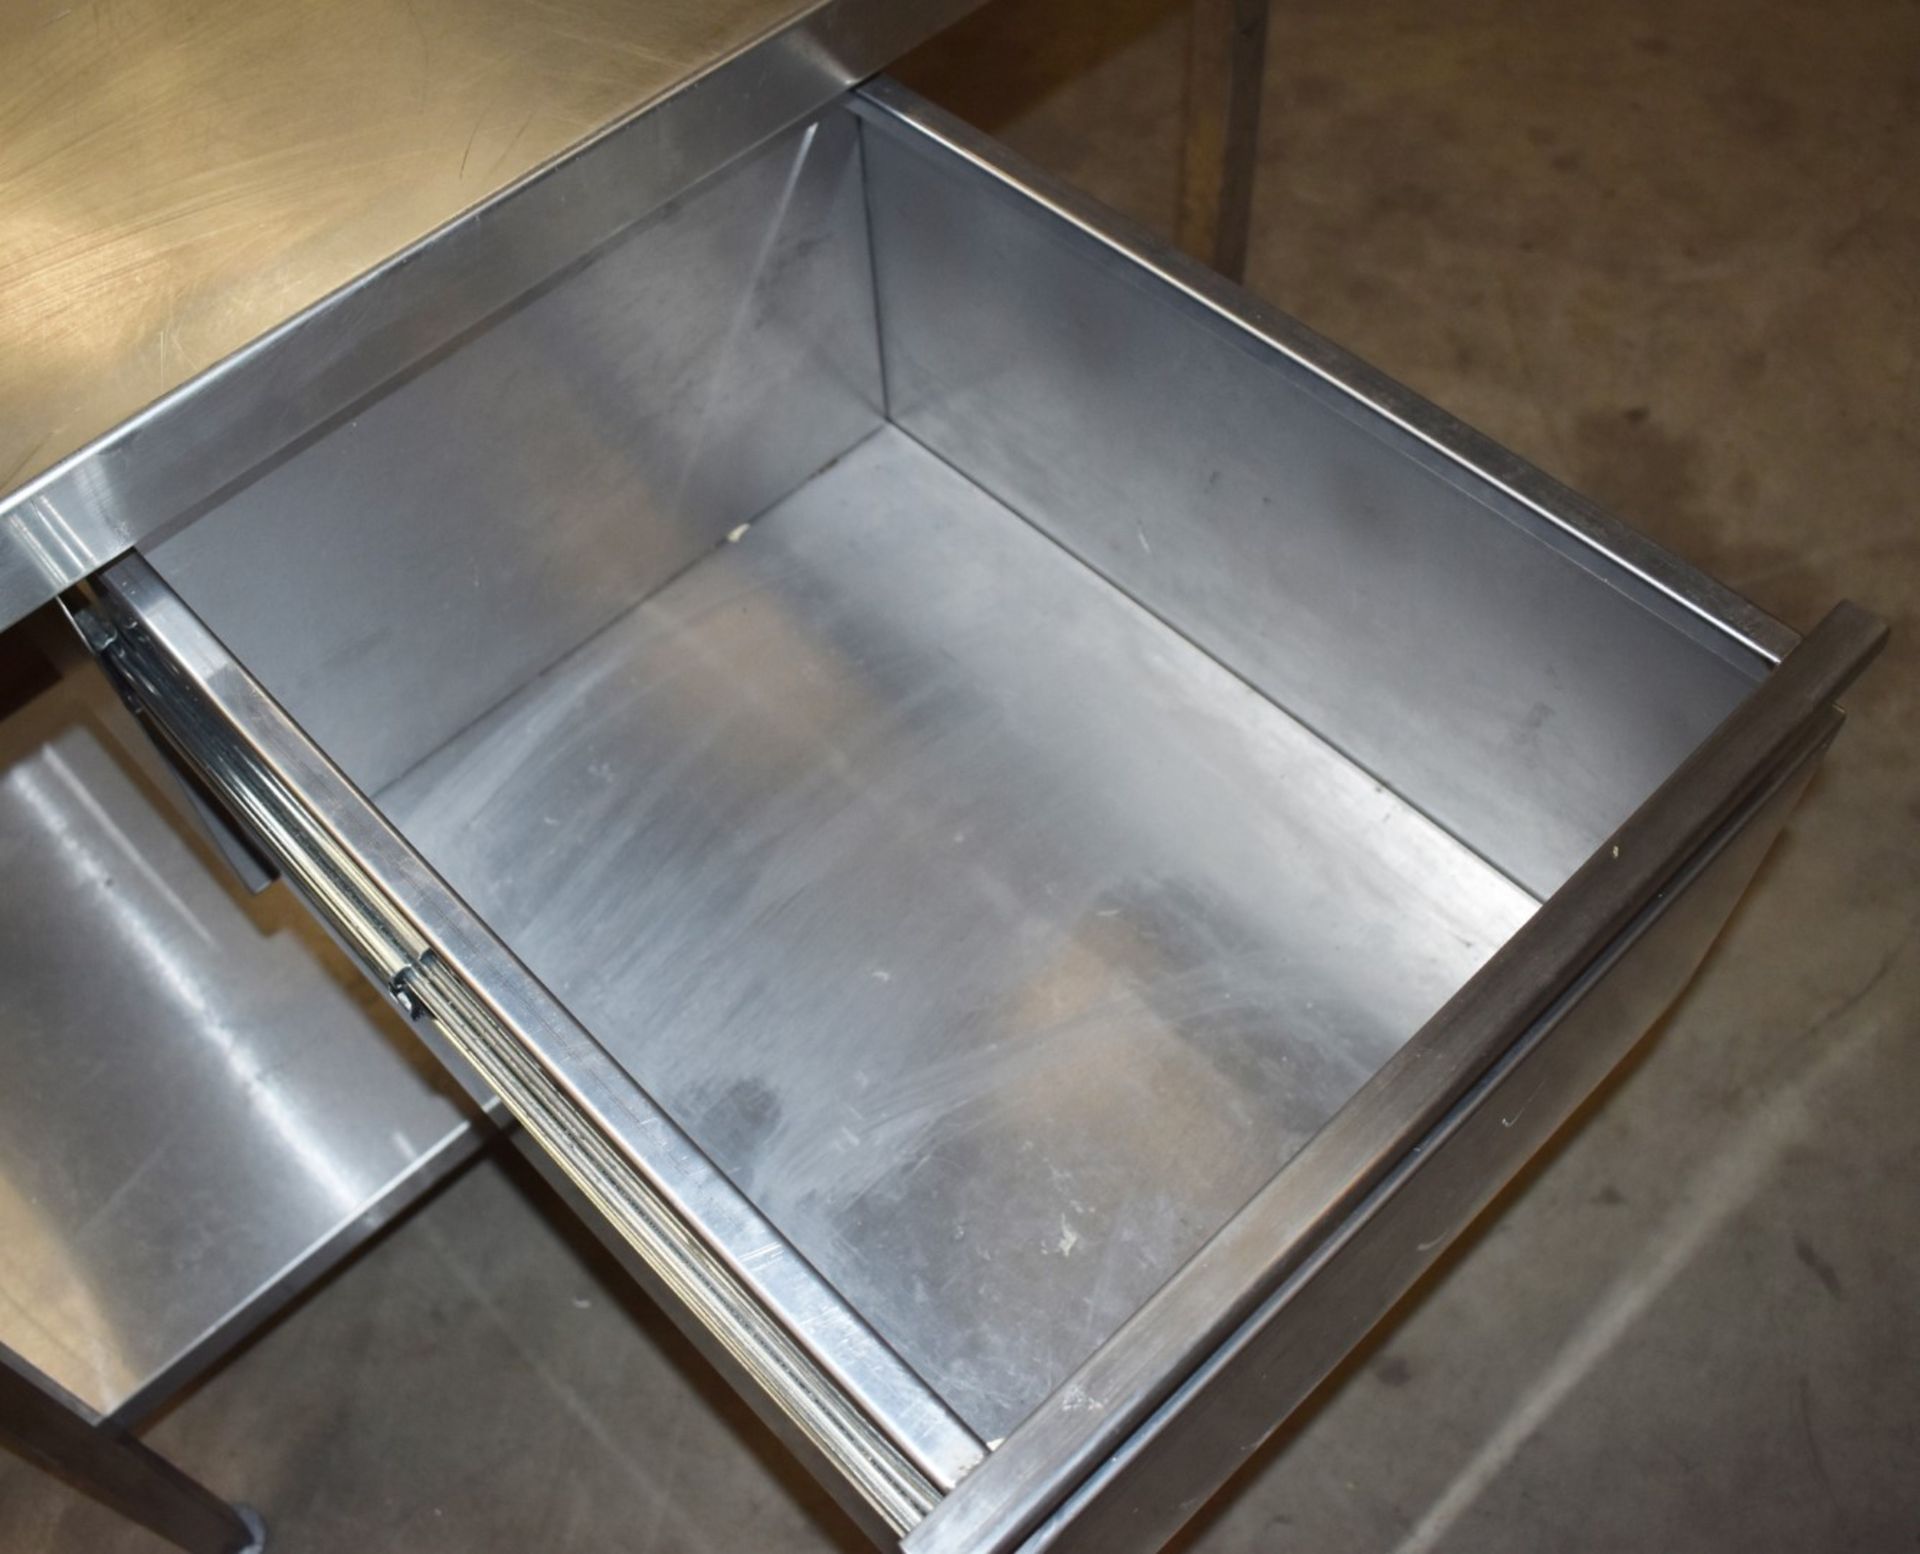 1 x Stainless Steel Prep Bench With Undershelf, Upstand and Central Drawer - H86 x W100 x D70 - Image 5 of 6